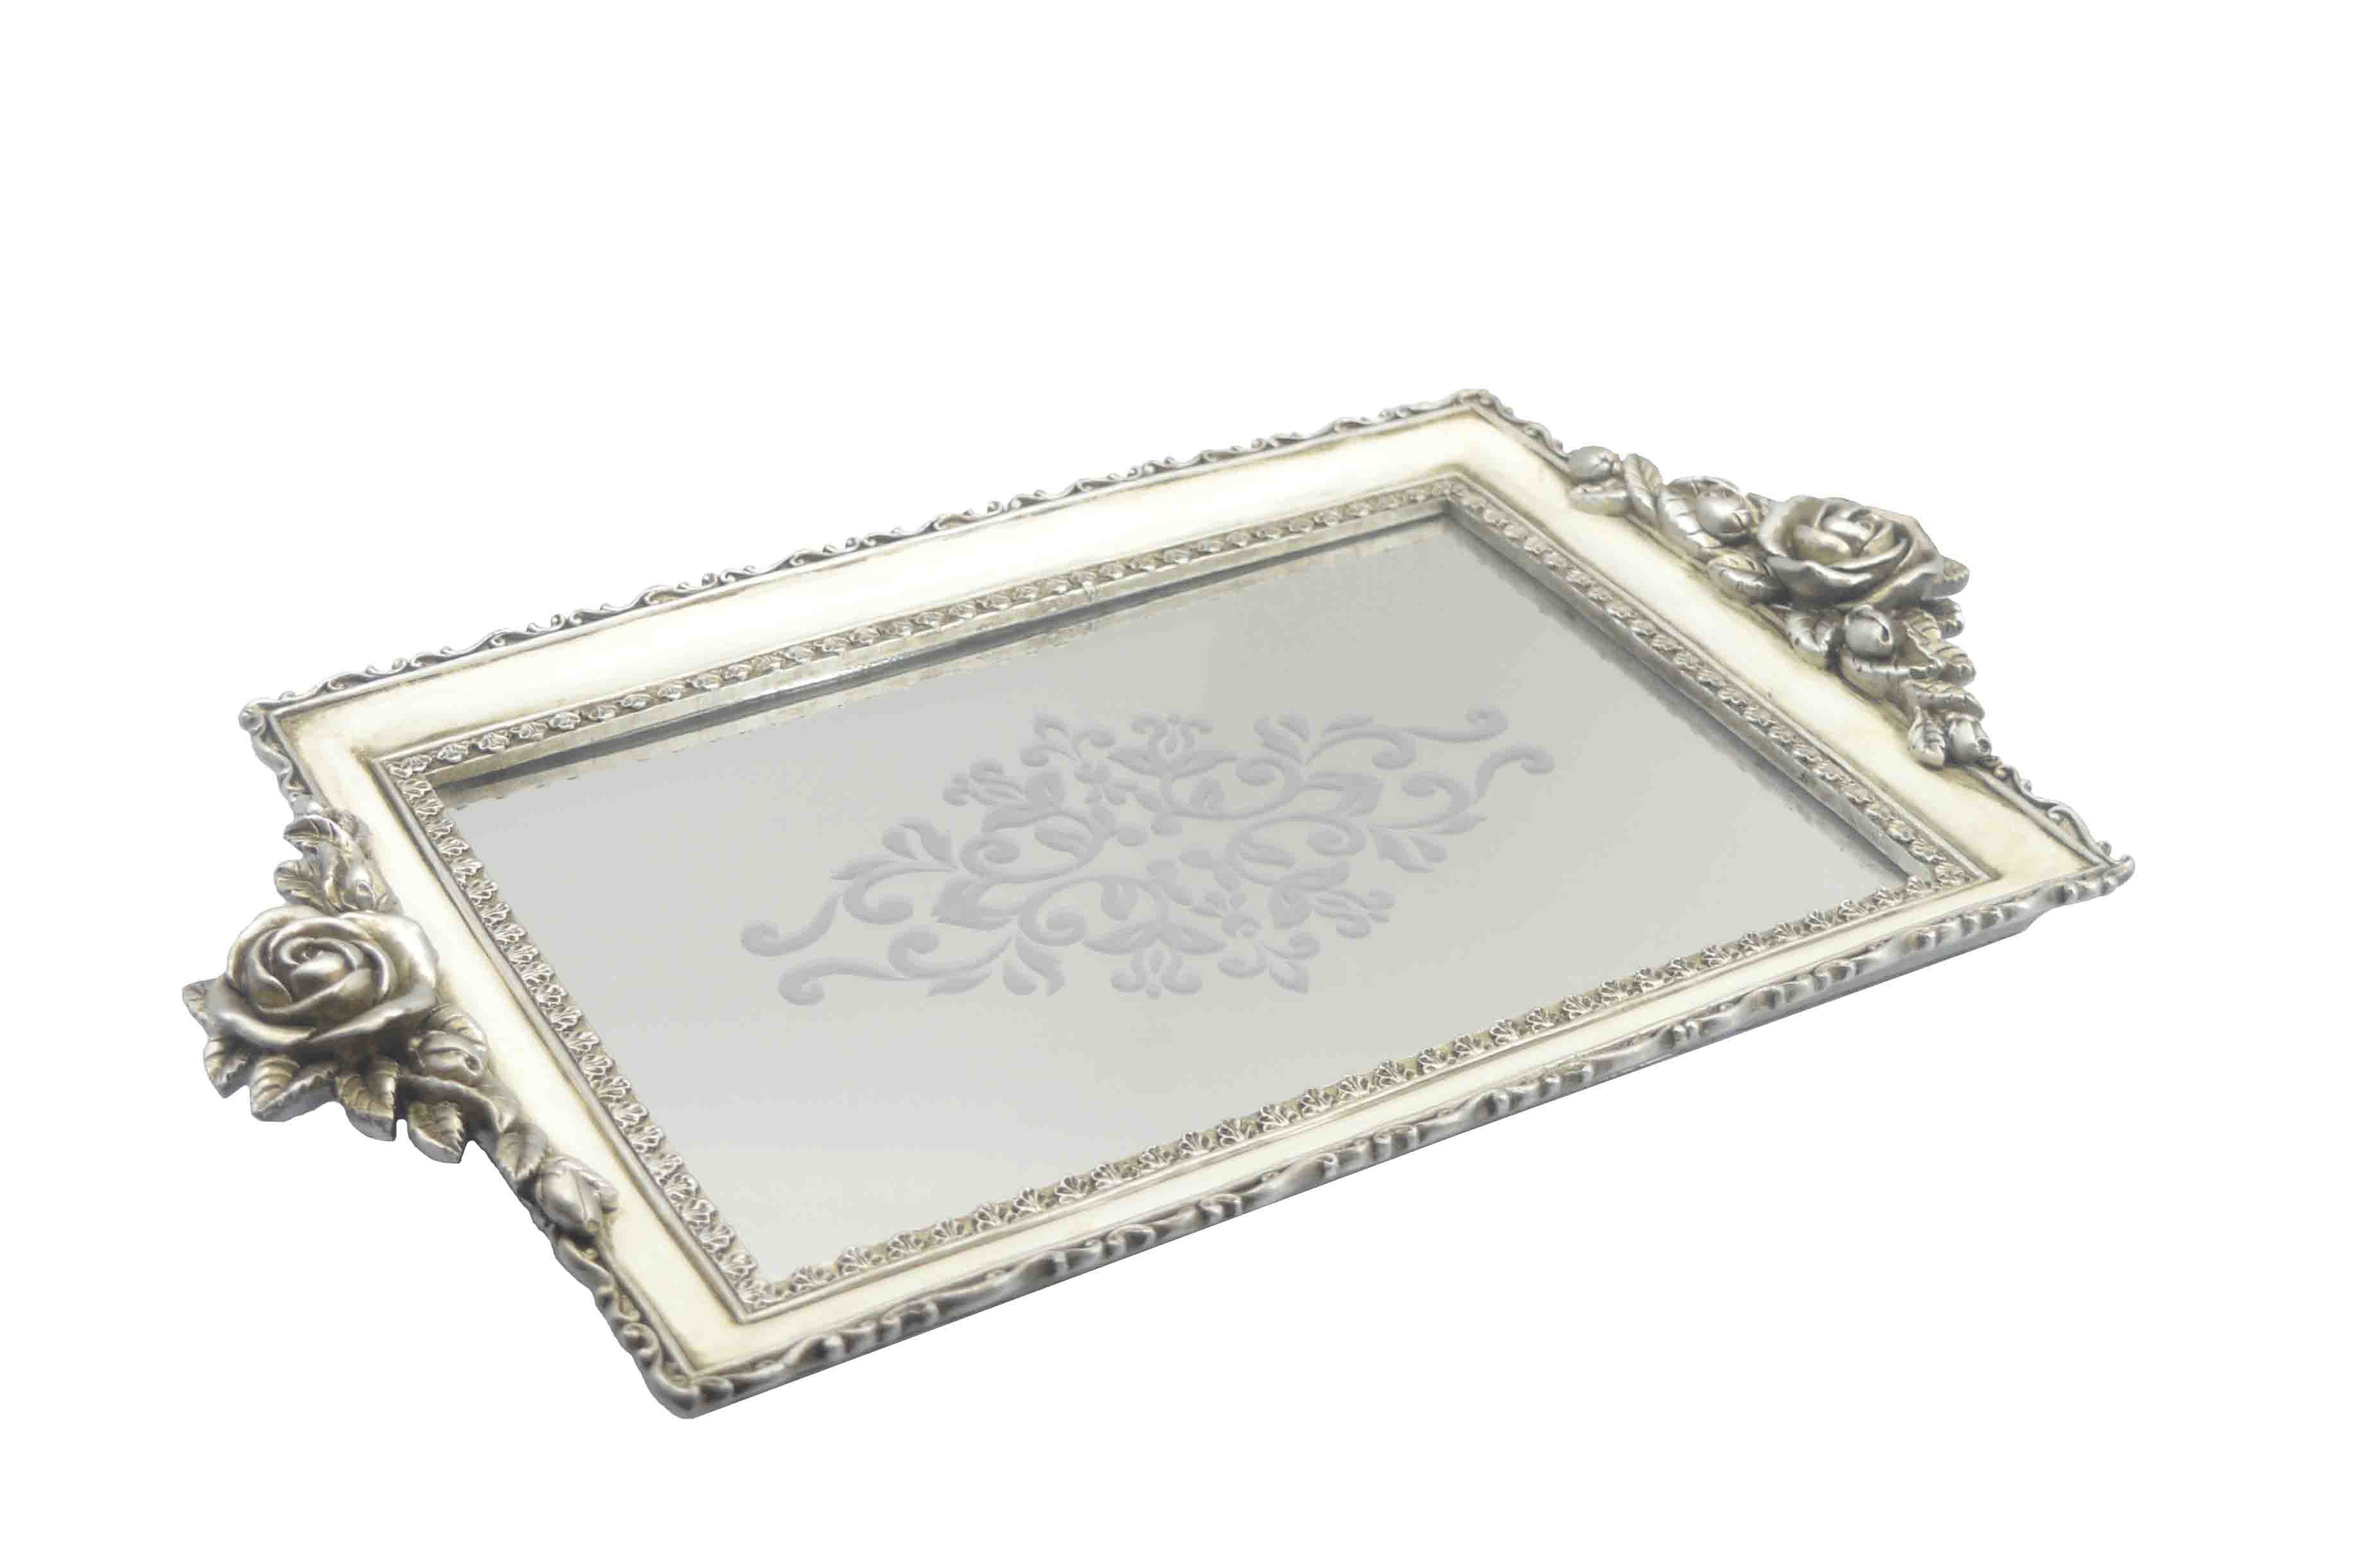 Rose Rectangle Resin Mirrored Vanity Tray For Display Beautiful Jewelry